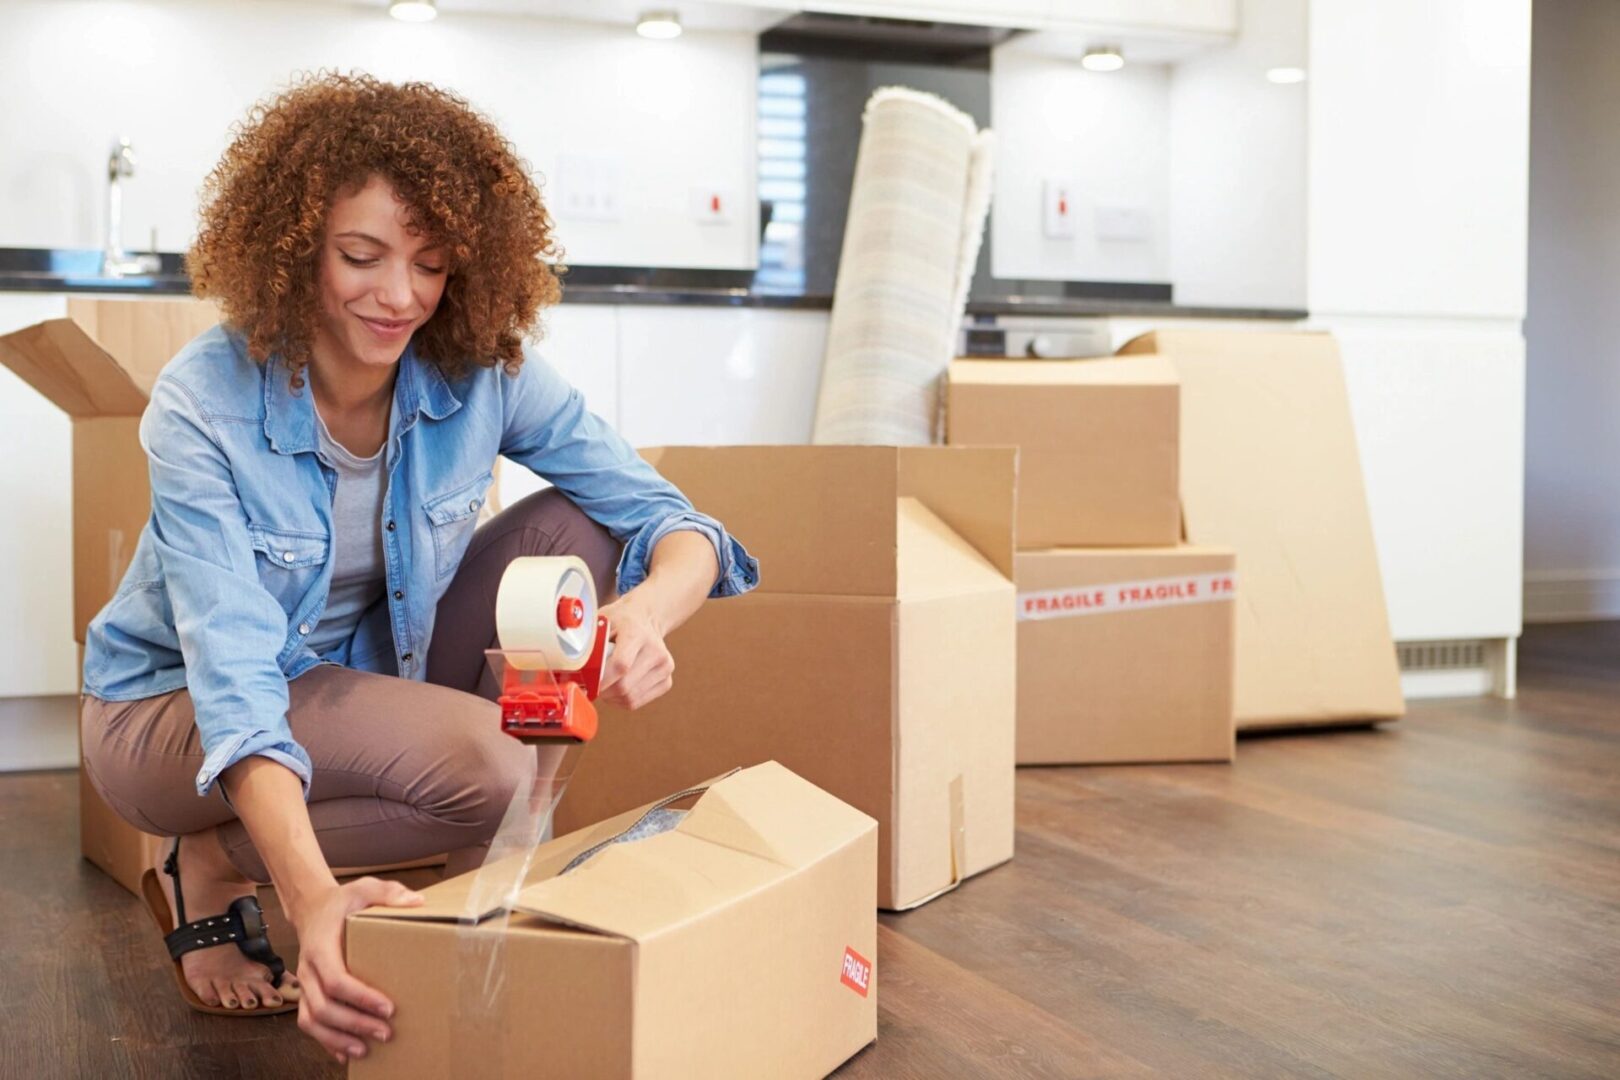 Best Moving Services Company In Carmel, Indianapolis | My Movers Inc.